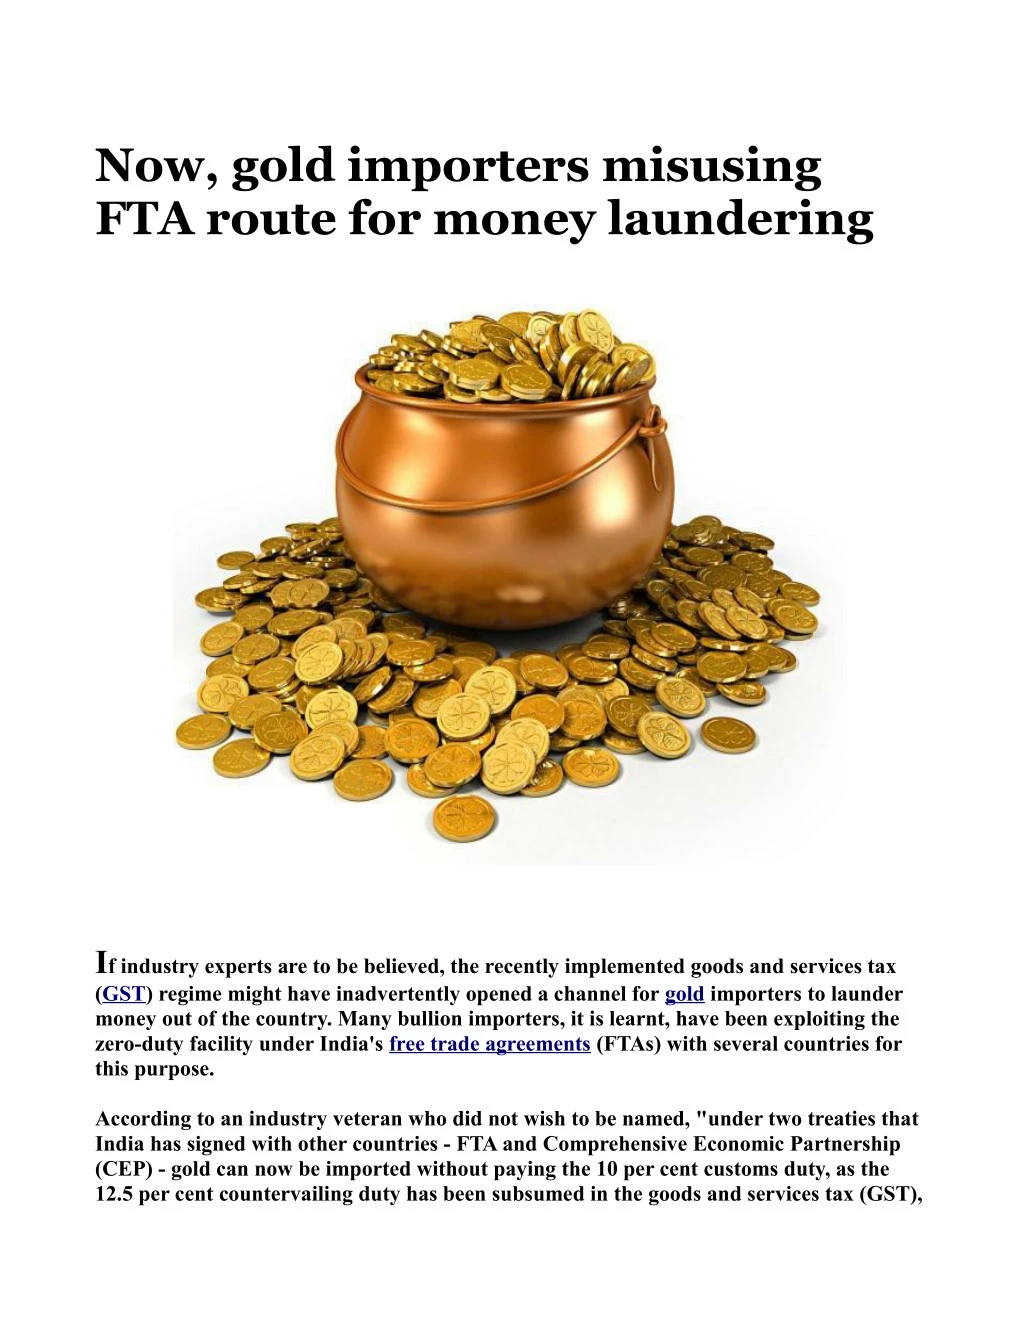 now gold importers misusing fta route for money